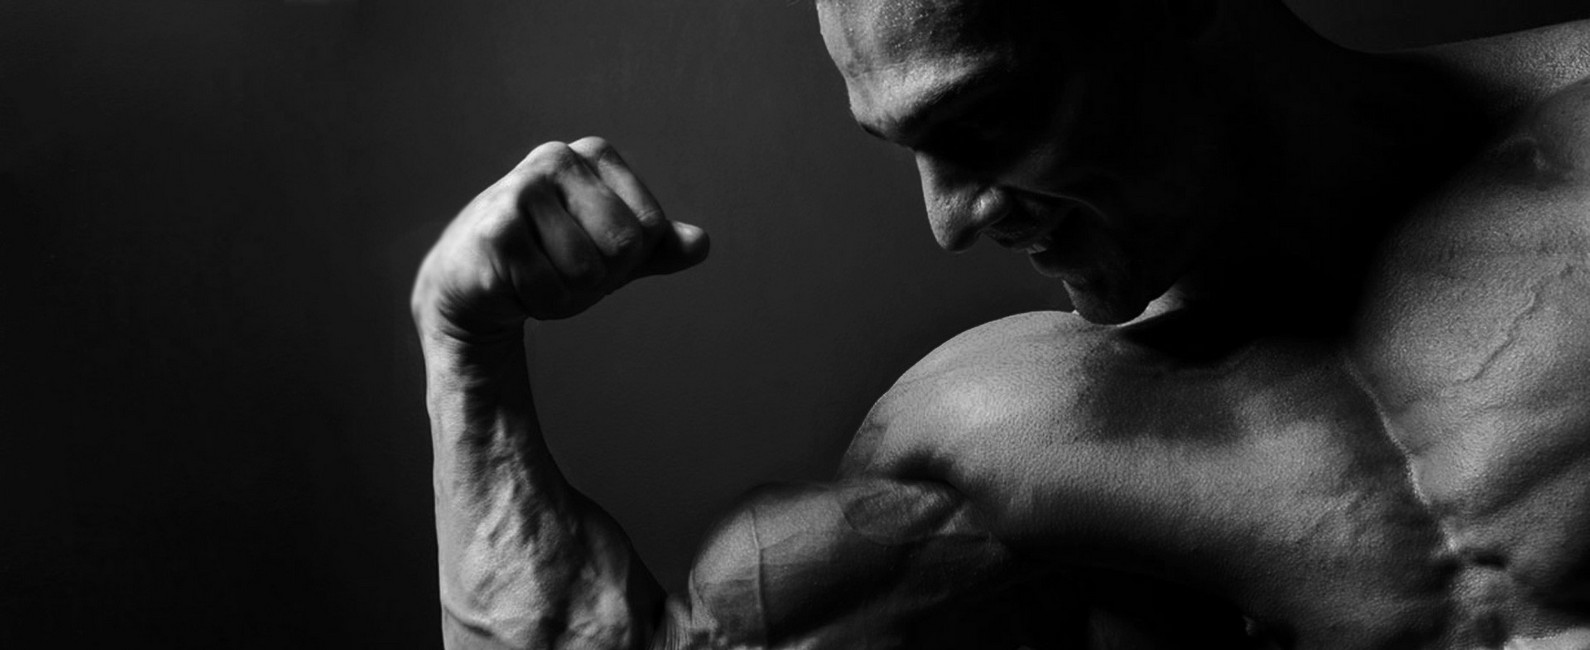 Best steroids for muscle gain without side effects in india